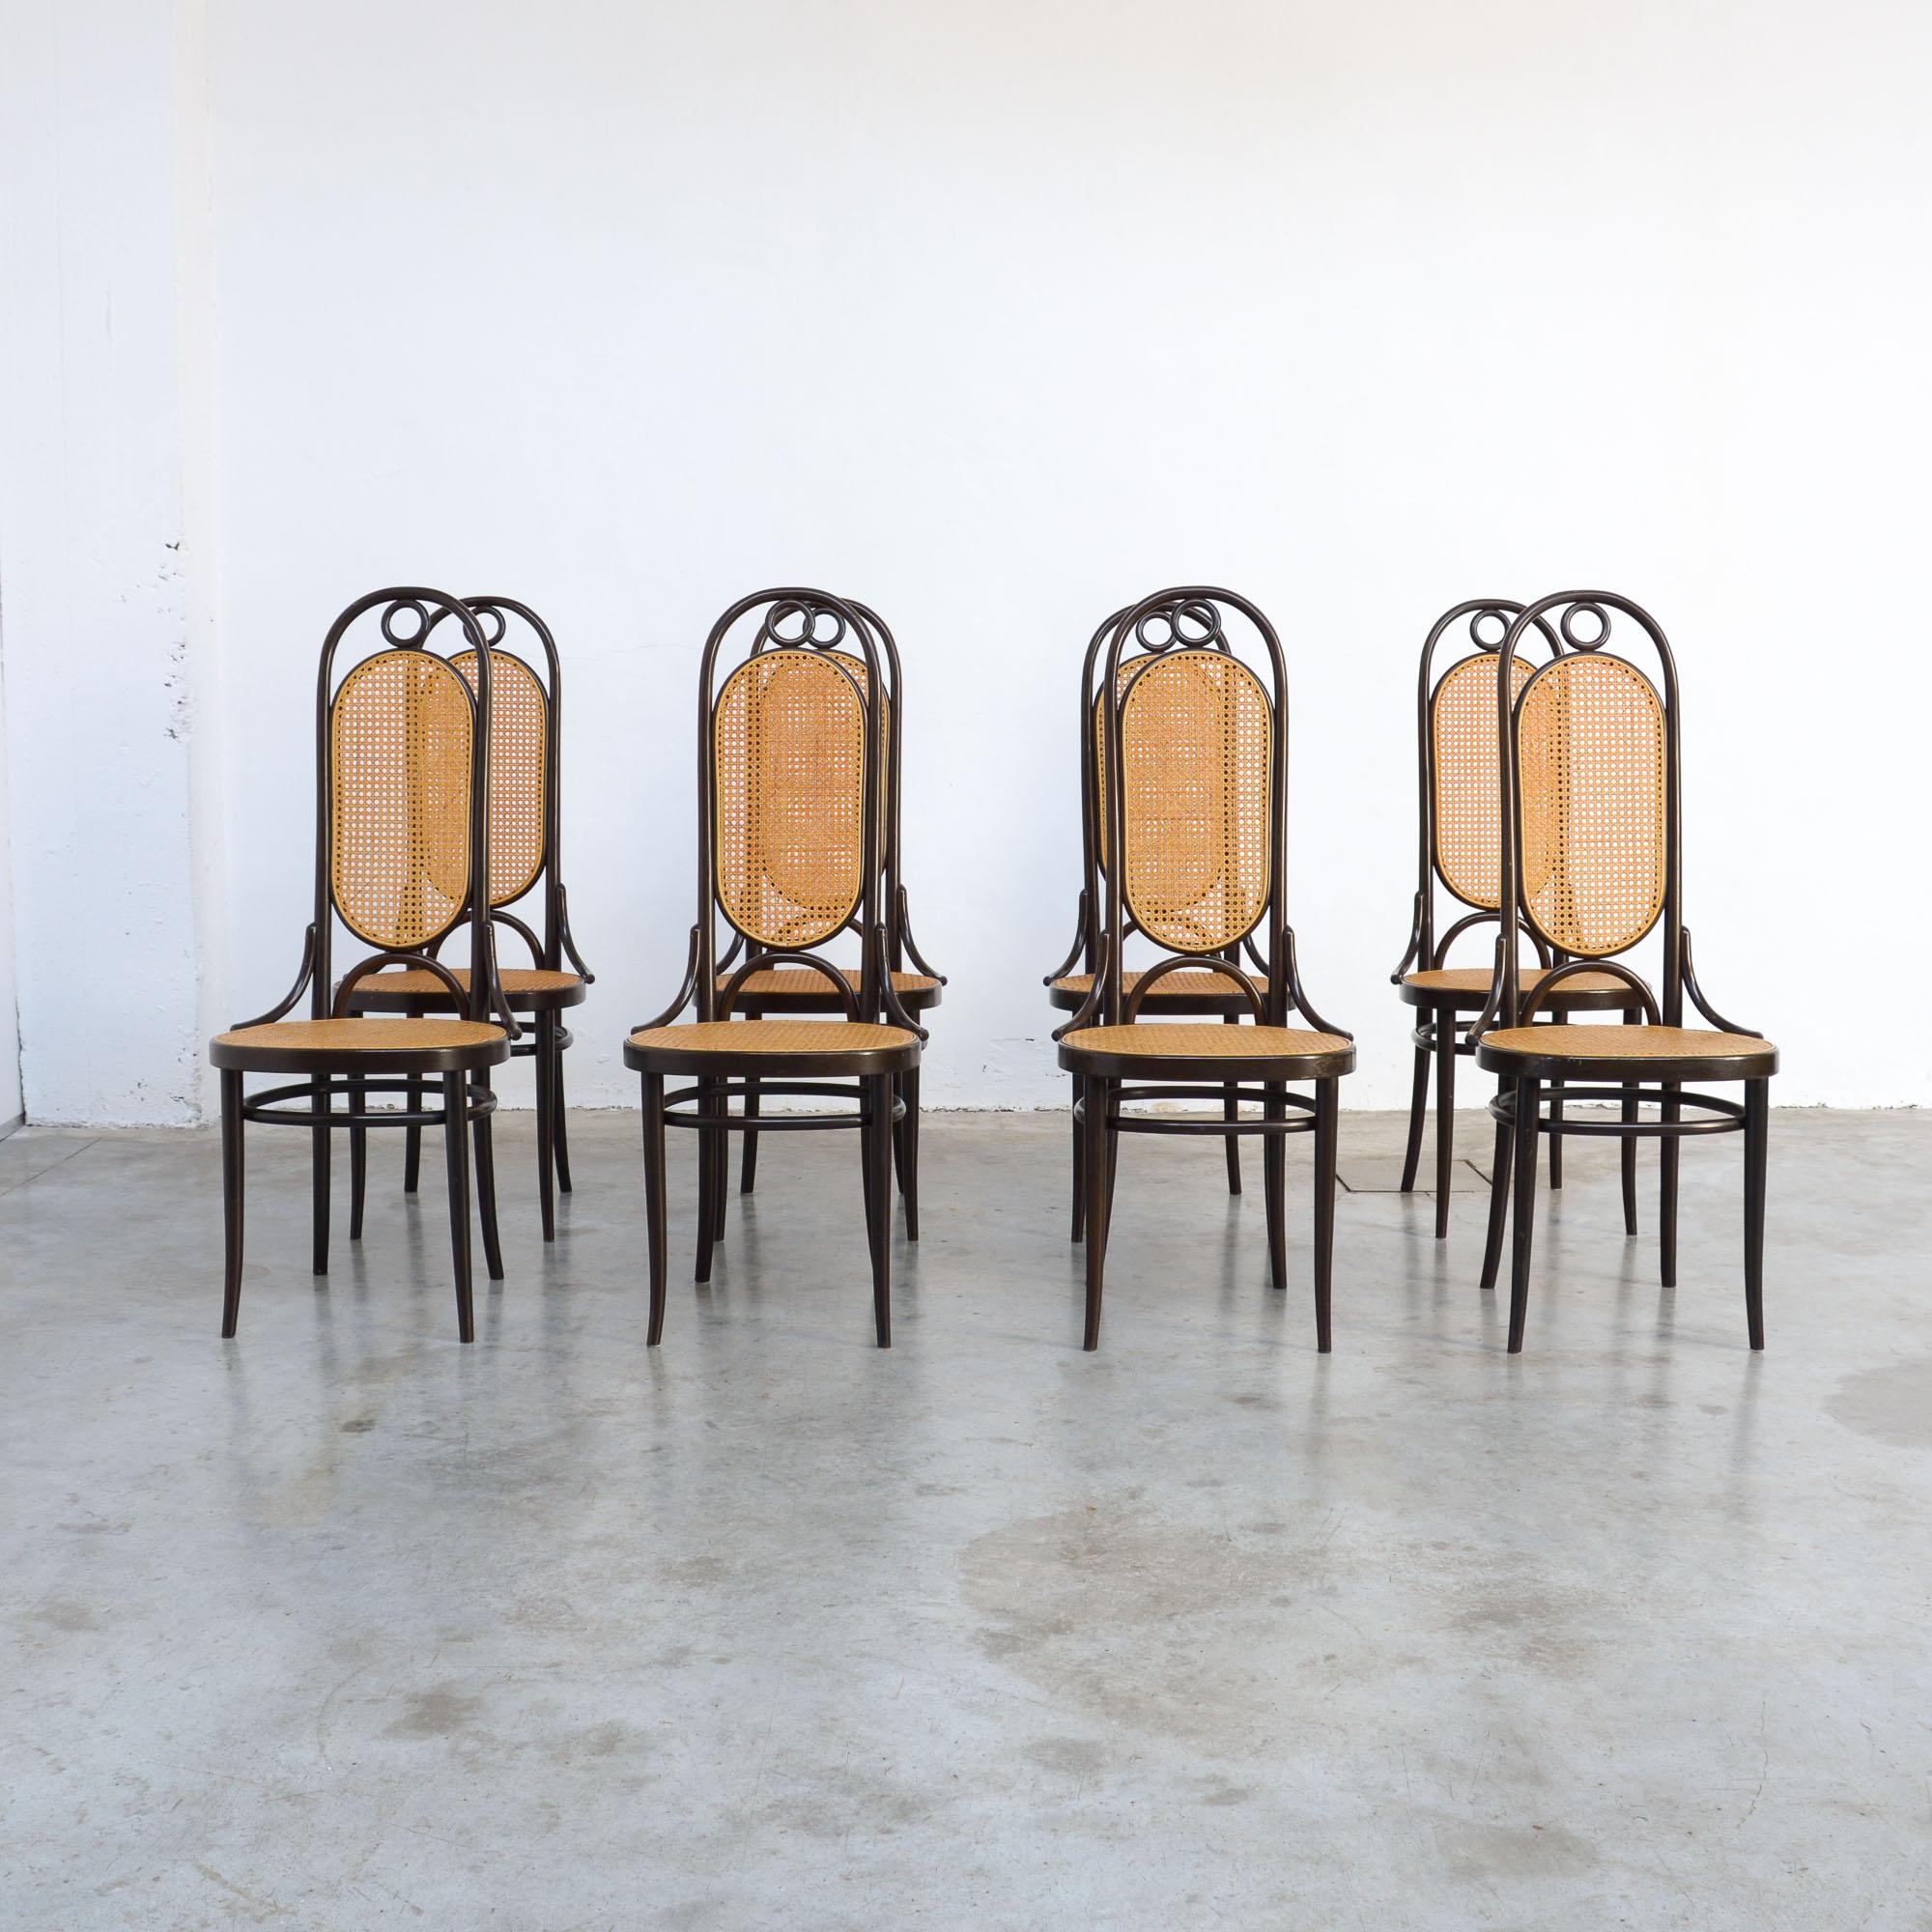 This set of eight bentwood dining chairs model 207R, also known as Long John, was made by Thonet in 1979. The original design dates from the early 20th century but had a revival in the 1970s.
These chairs have dark brown bentwood frames with caned